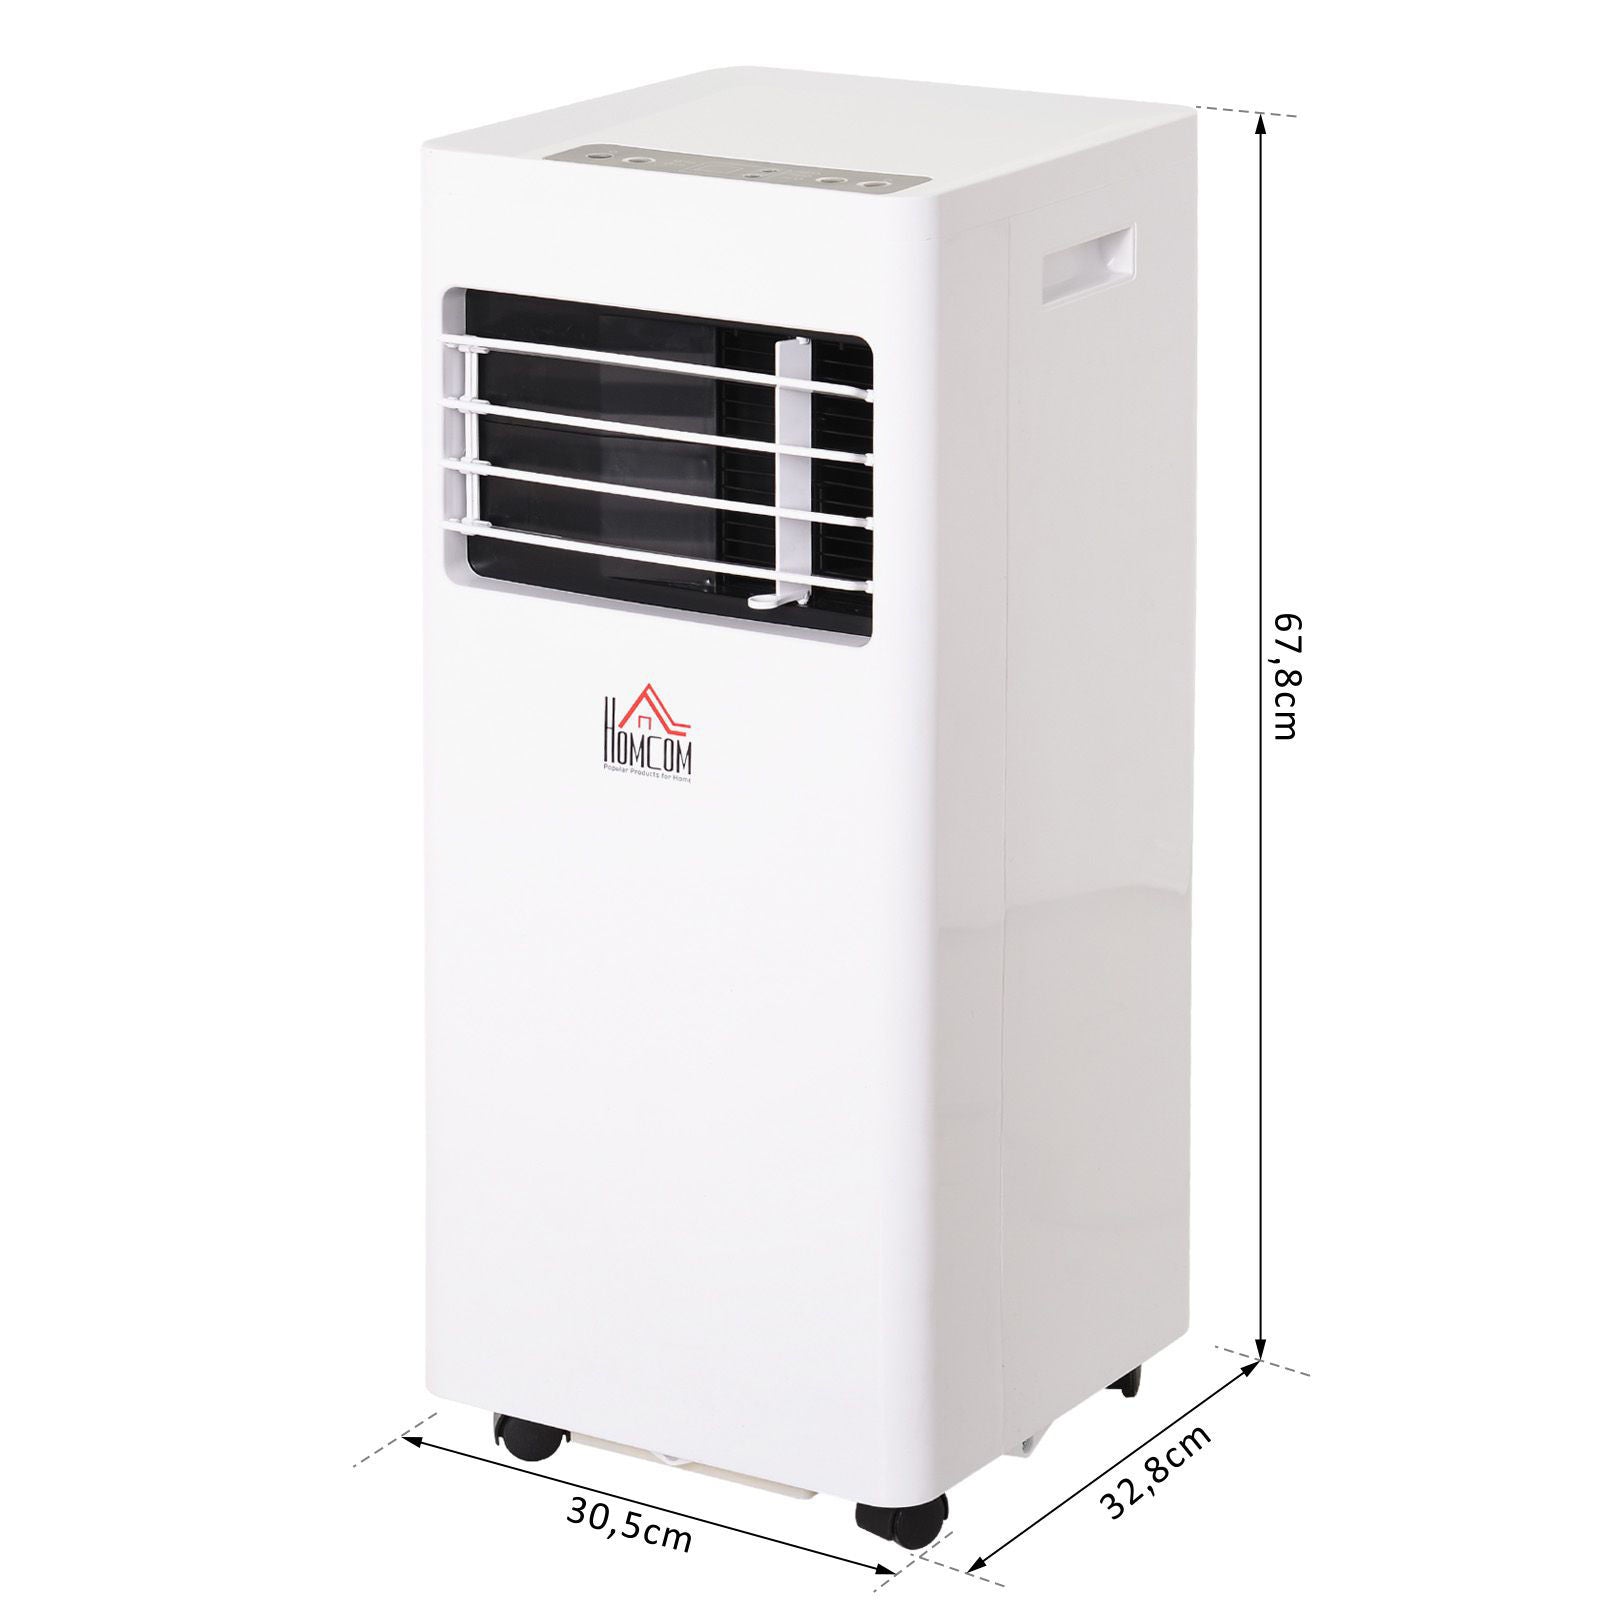 Nancy's Red Bank Mobile Airconditioner - Wit - Abs - 12 cm x 12,91 cm x 26,69 cm